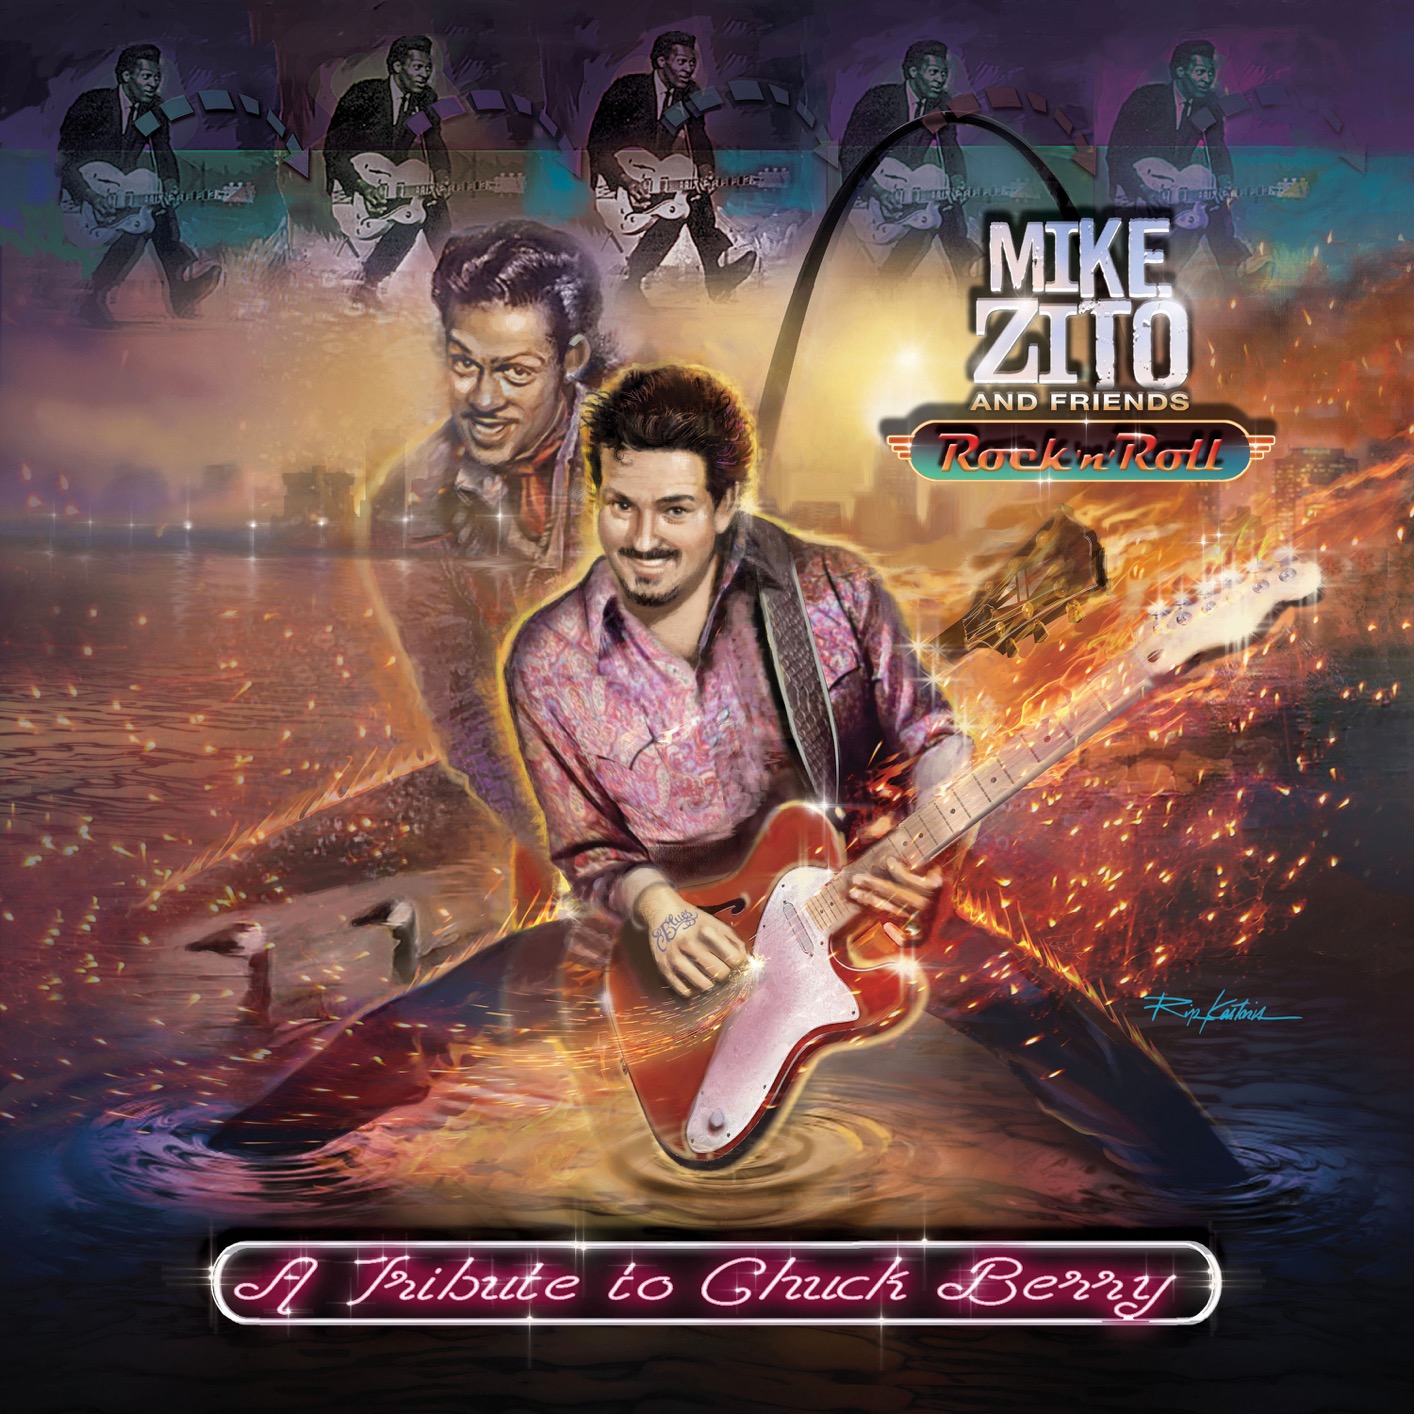 Mike Zito - Rock ‘n’ Roll: A Tribute to Chuck Berry (2019) [FLAC 24bit/44,1kHz]